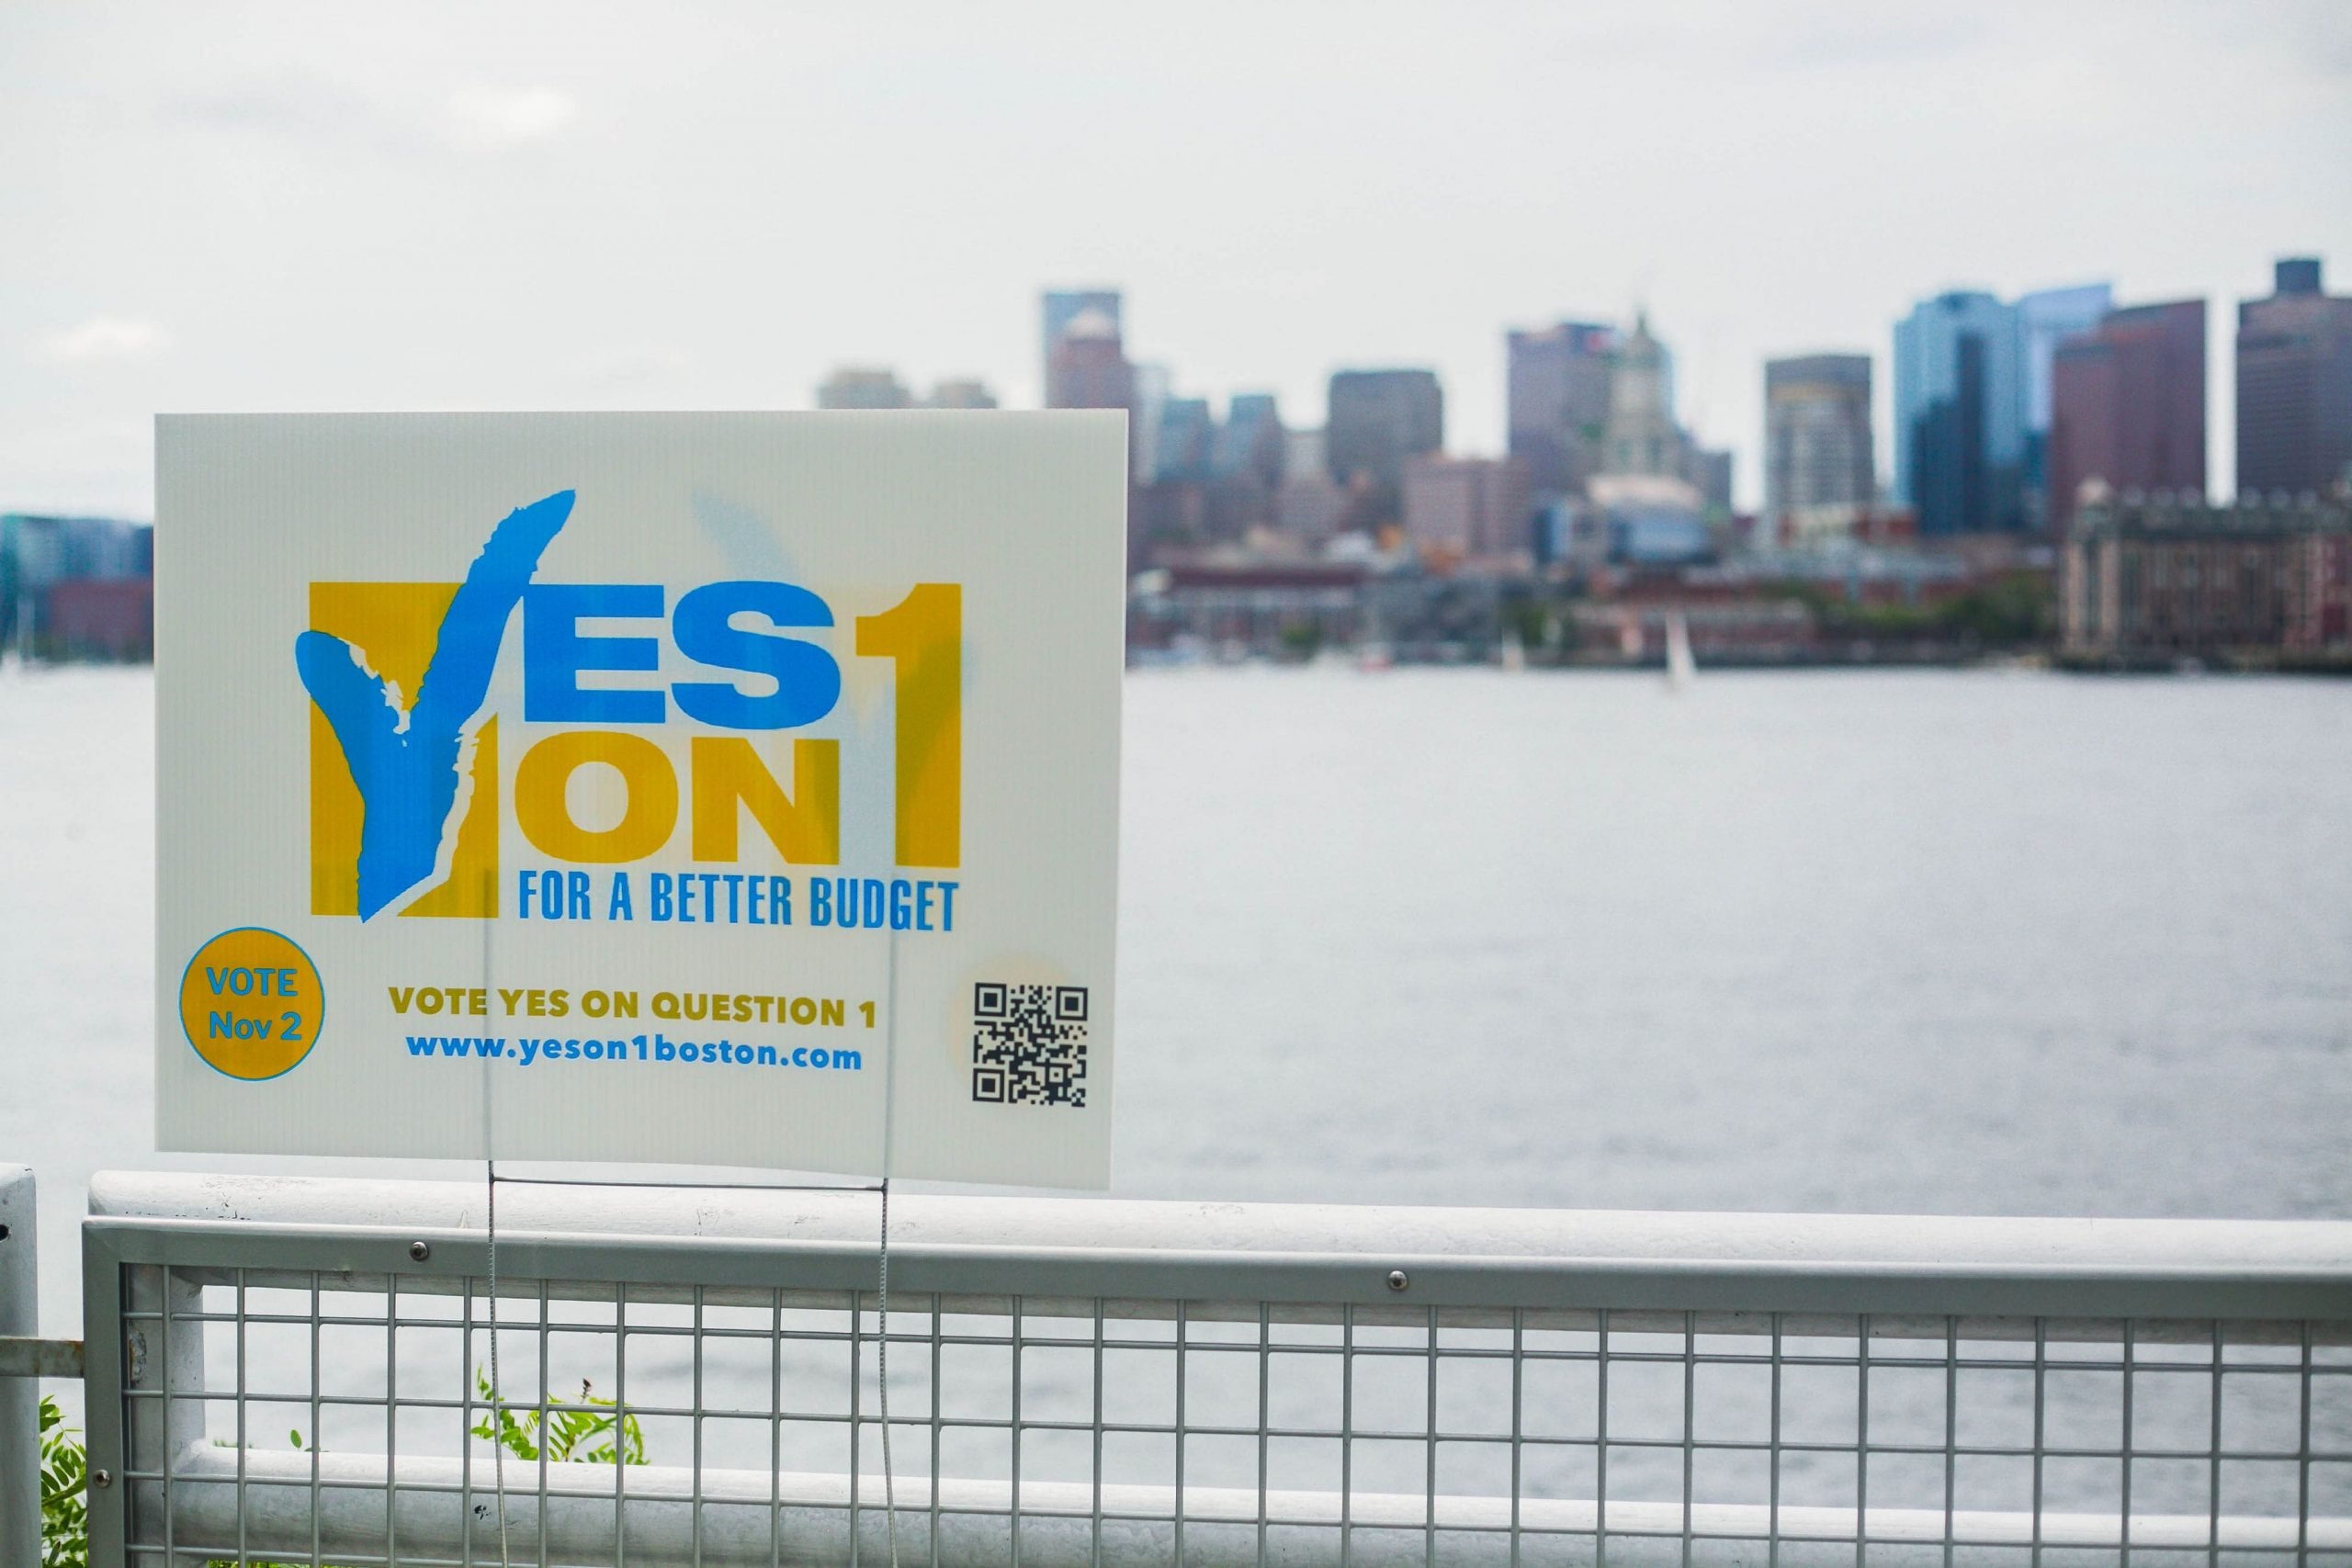 a Yes on 1 sign in focus in front of a fence, in the background there is water and the Boston skyline